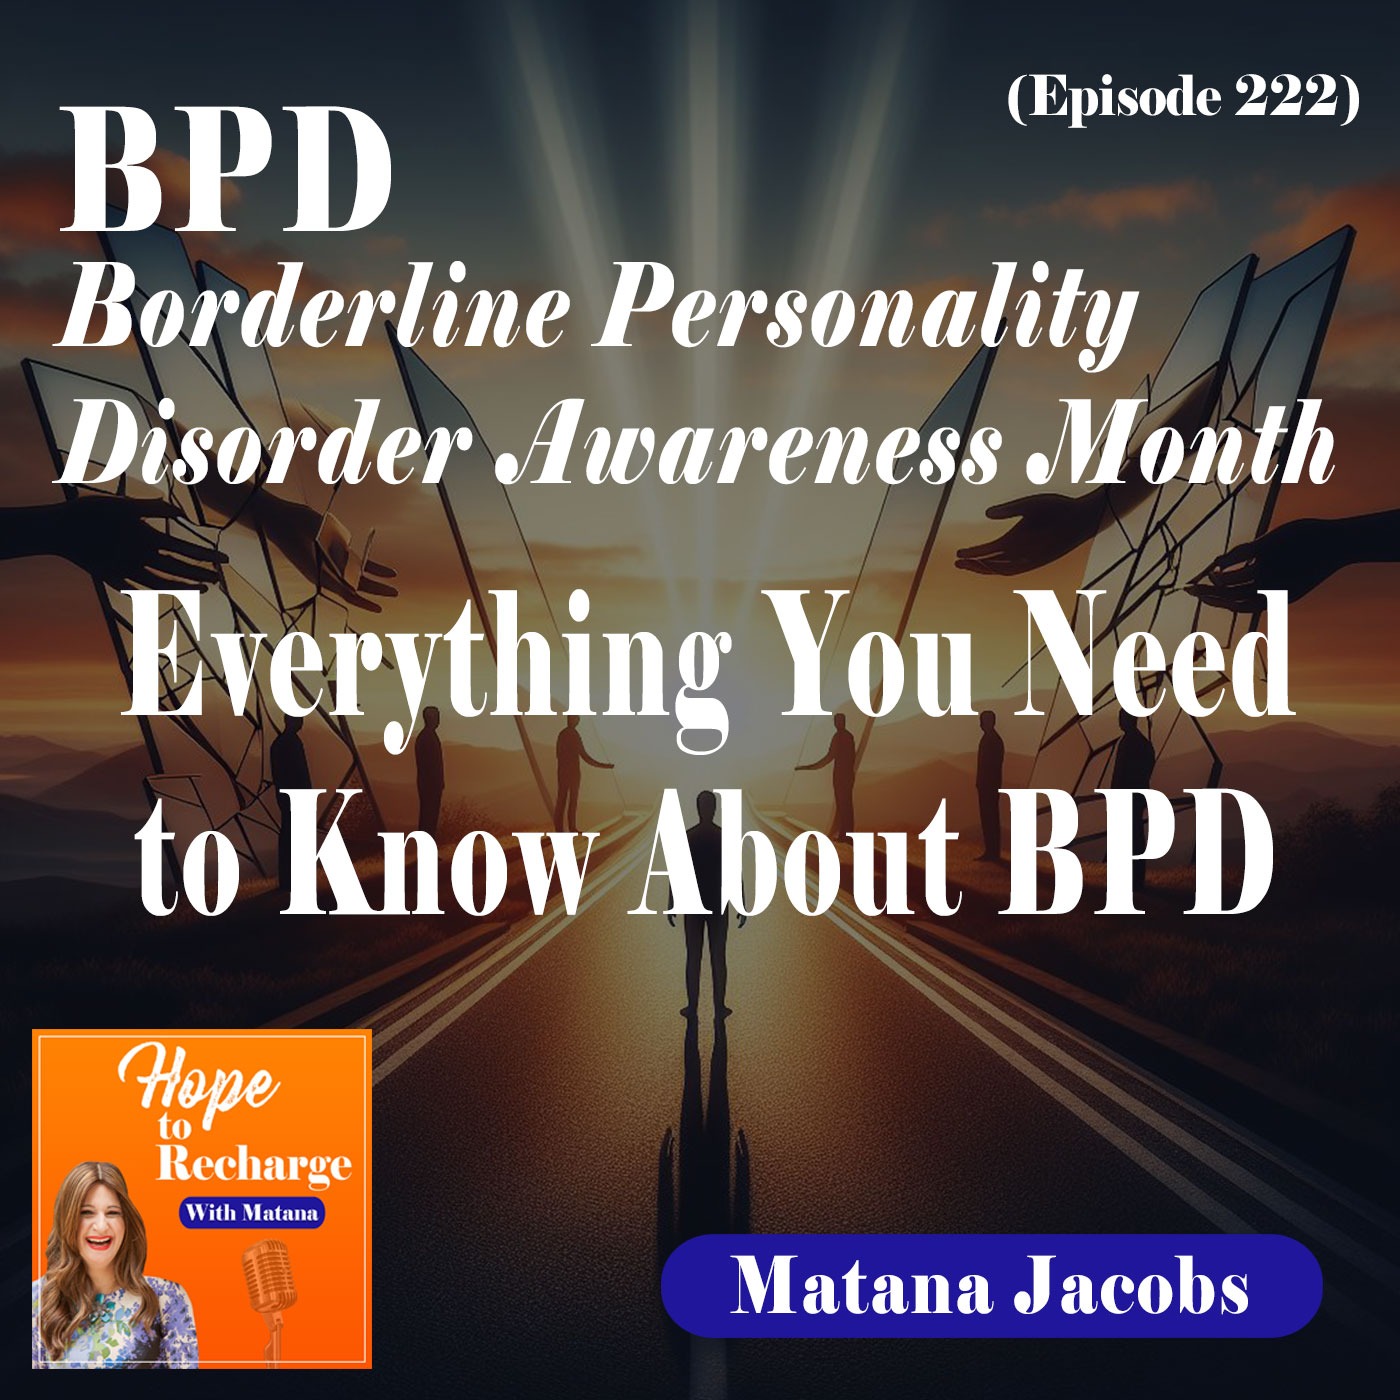 BPD - Borderline Personality Disorder Awareness Month - Everything You Need To Know